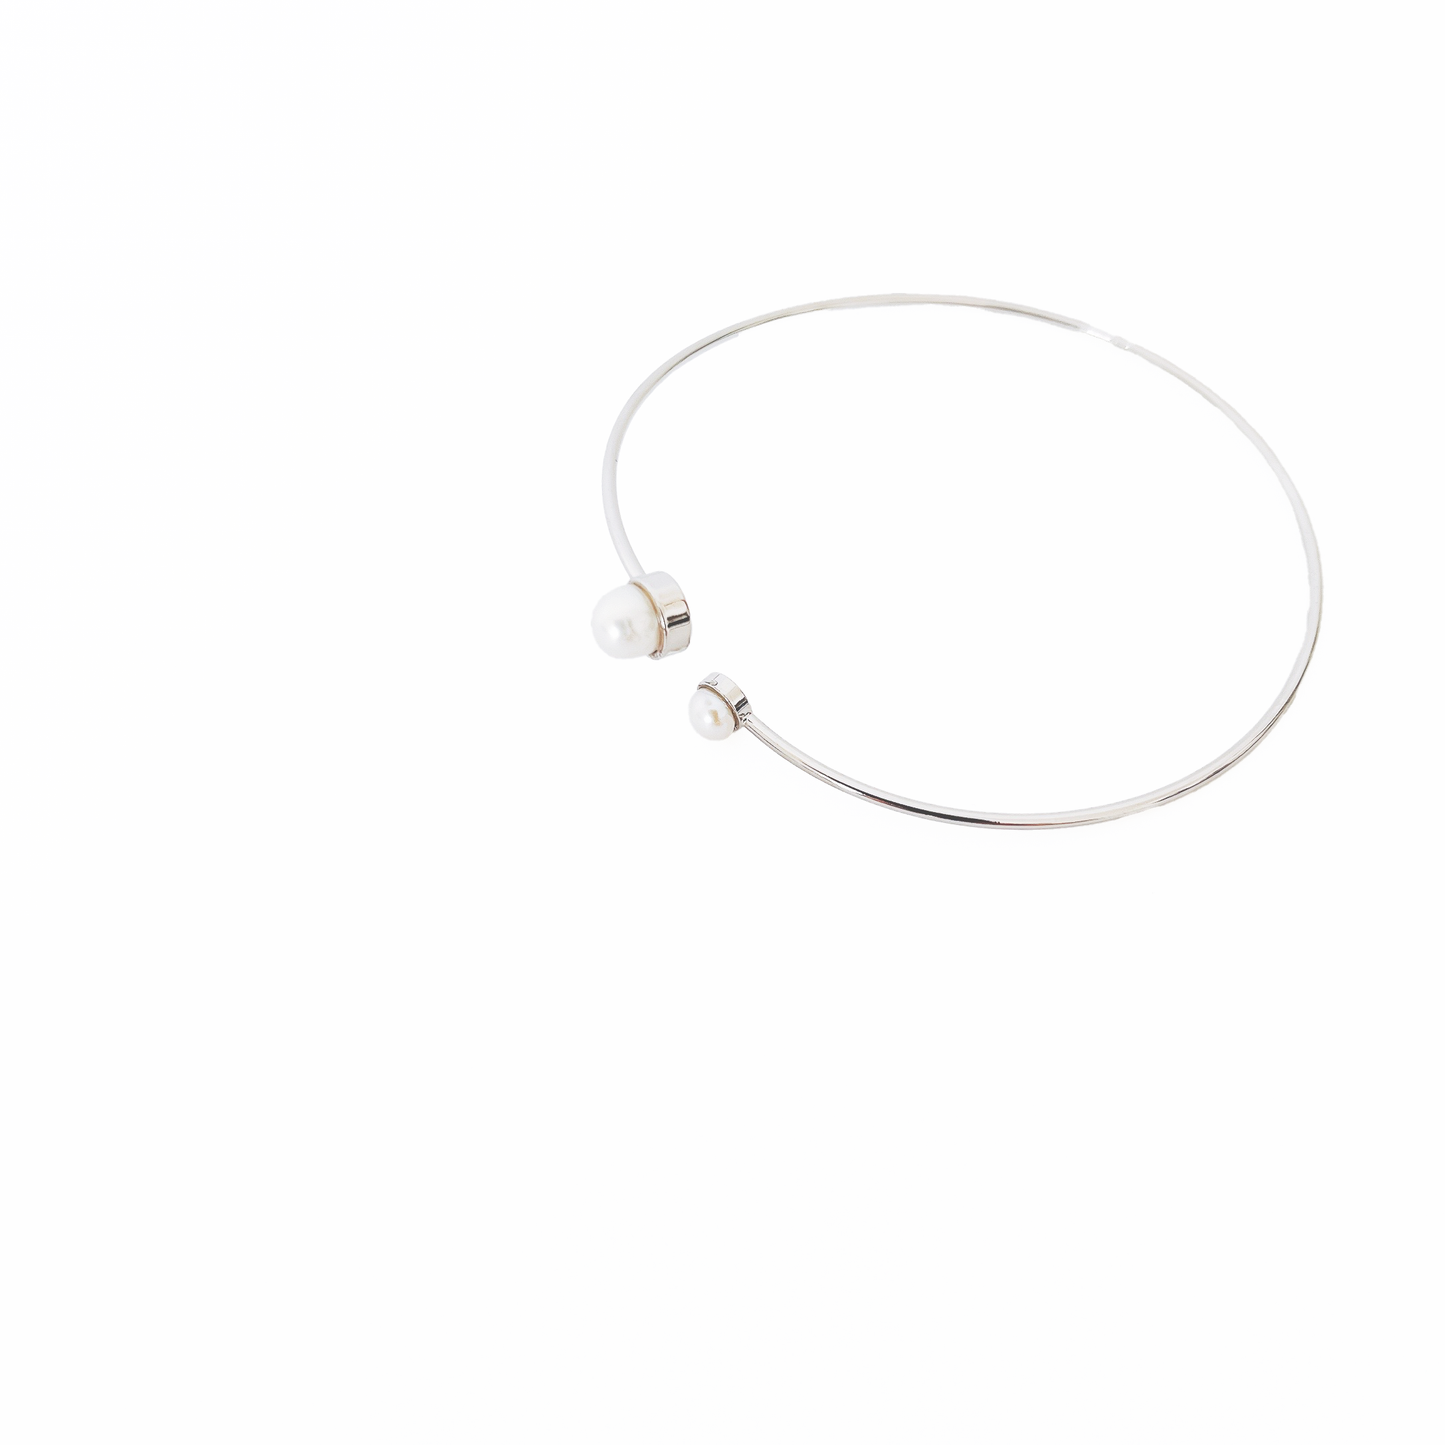 Open bracelet with two different size of pearls, colour silver by Hikaru Pearl